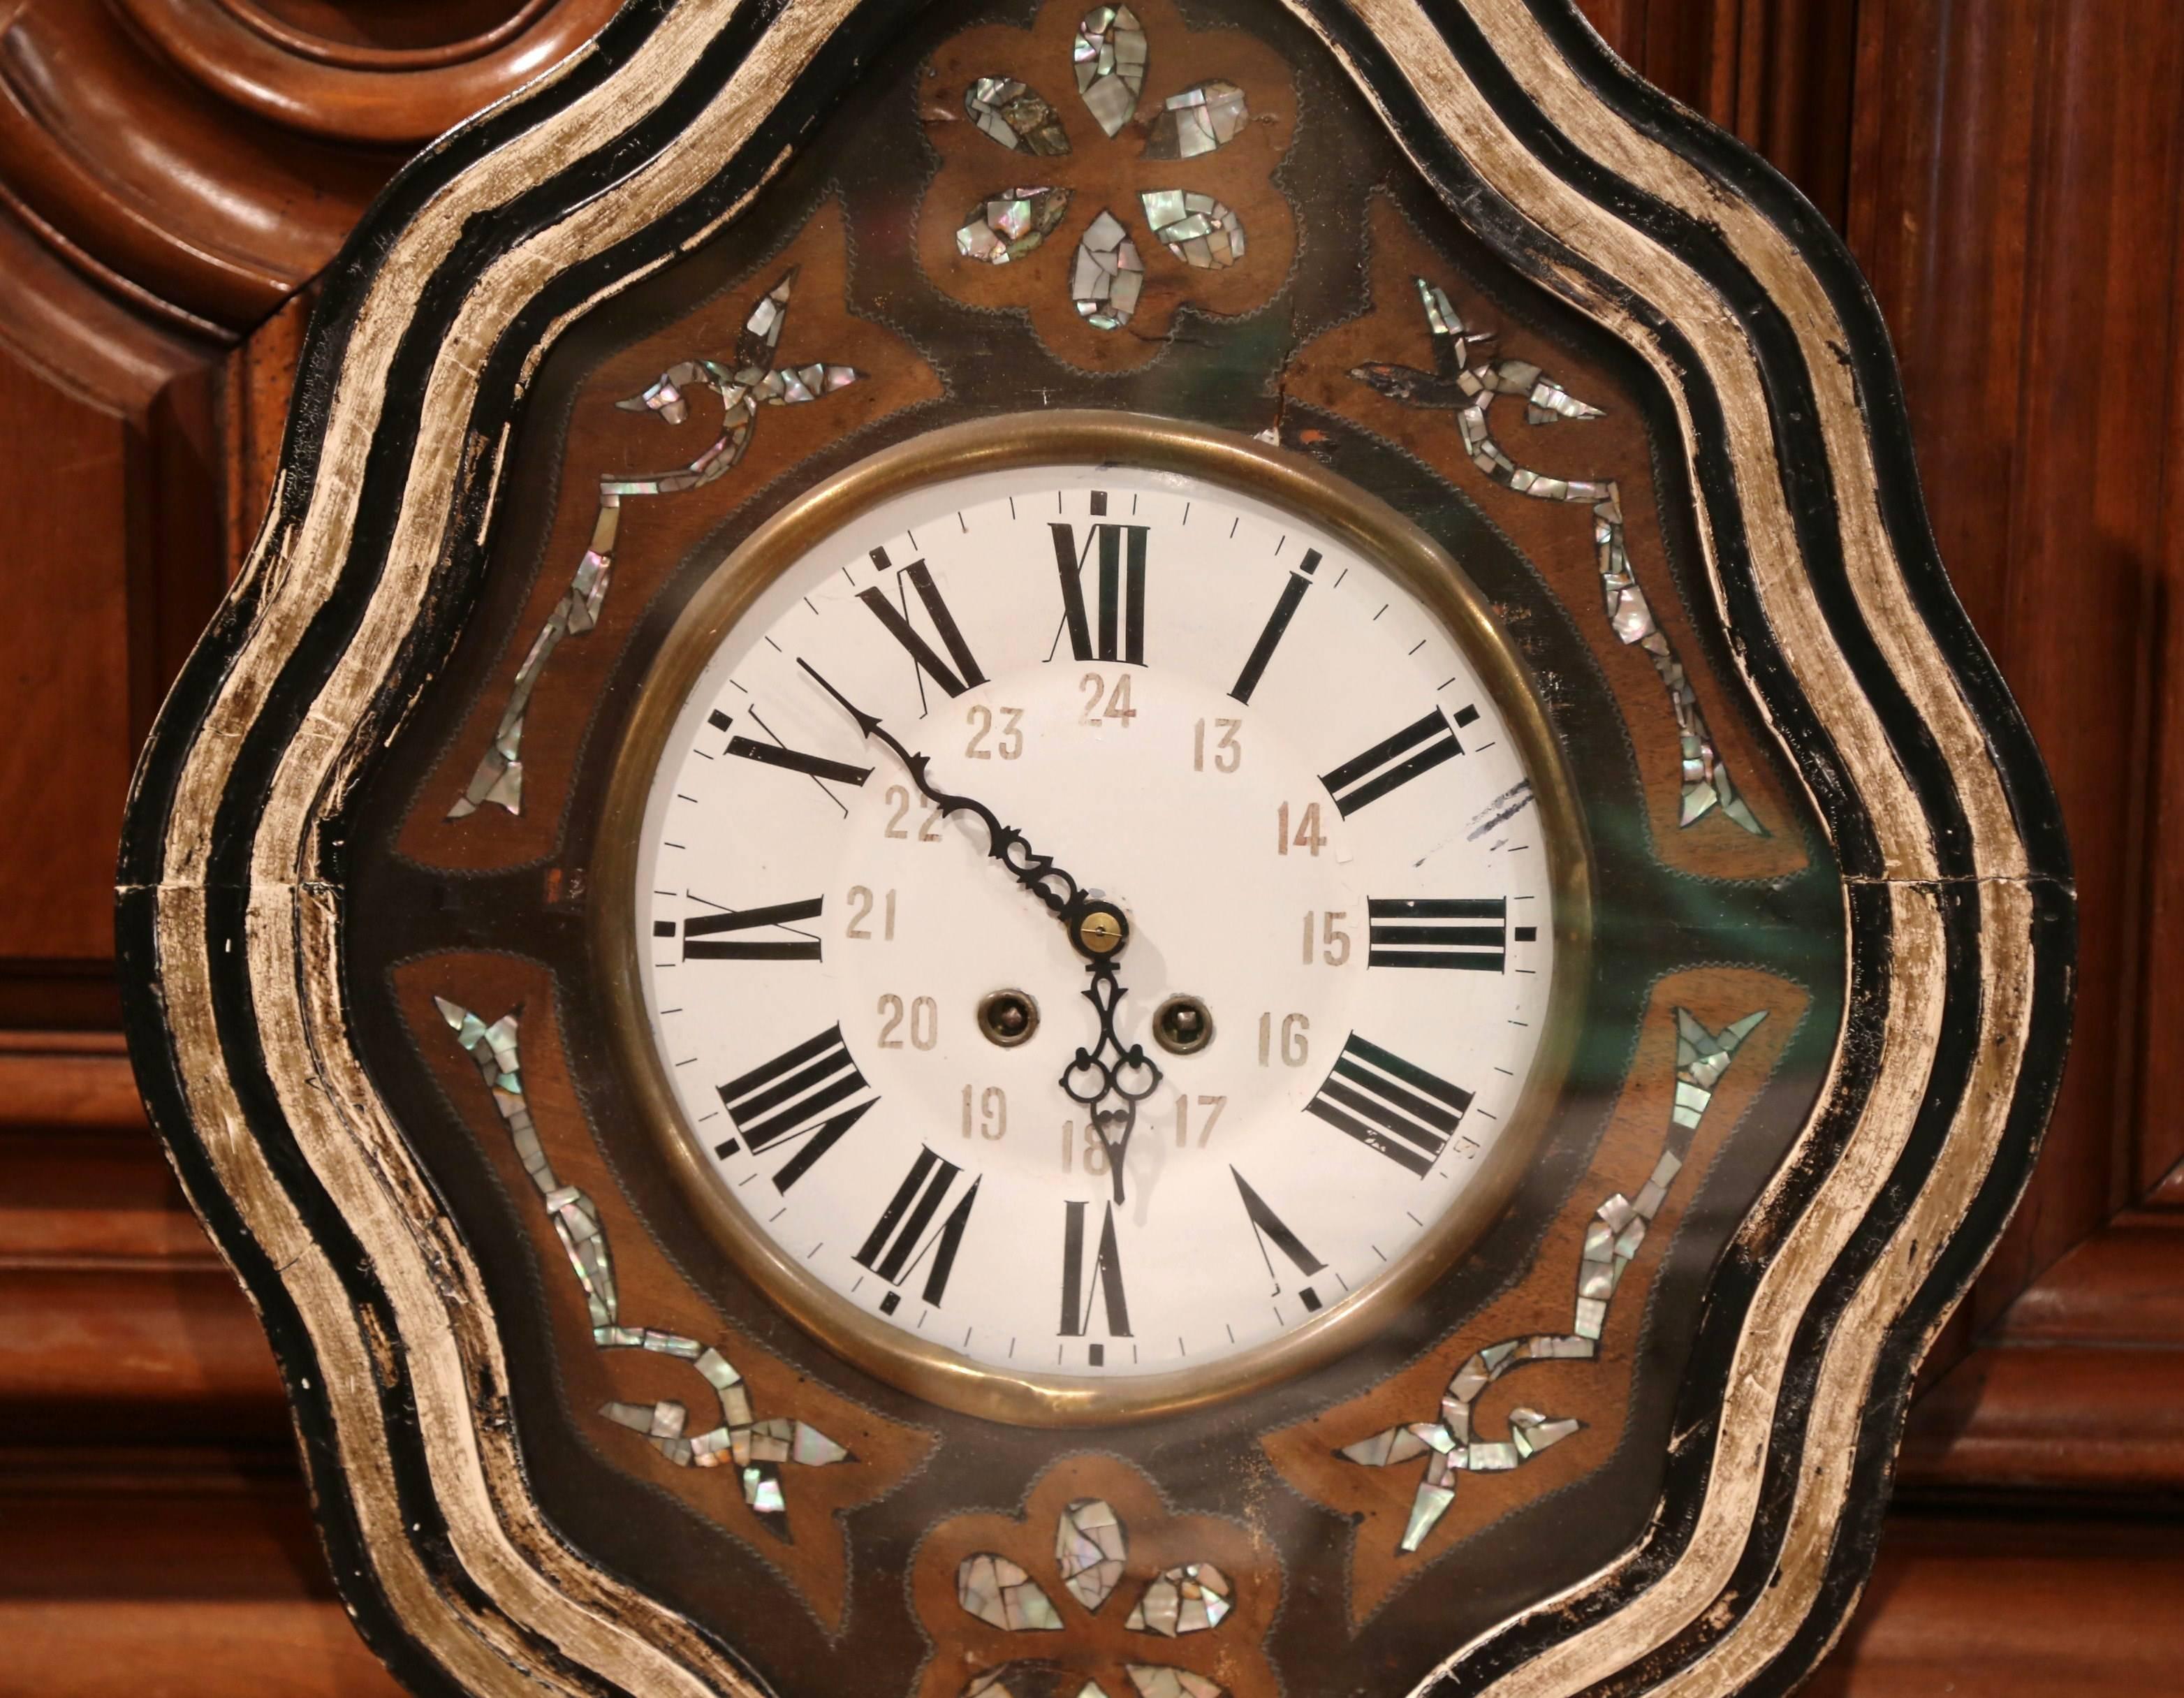 Elegant antique wall hanging clock from France; crafted circa 1870, the oval clock is hand painted around the perimeter; on the facade under the glass top, the piece features mother of pearl decorations. The clock mechanism is good working order and